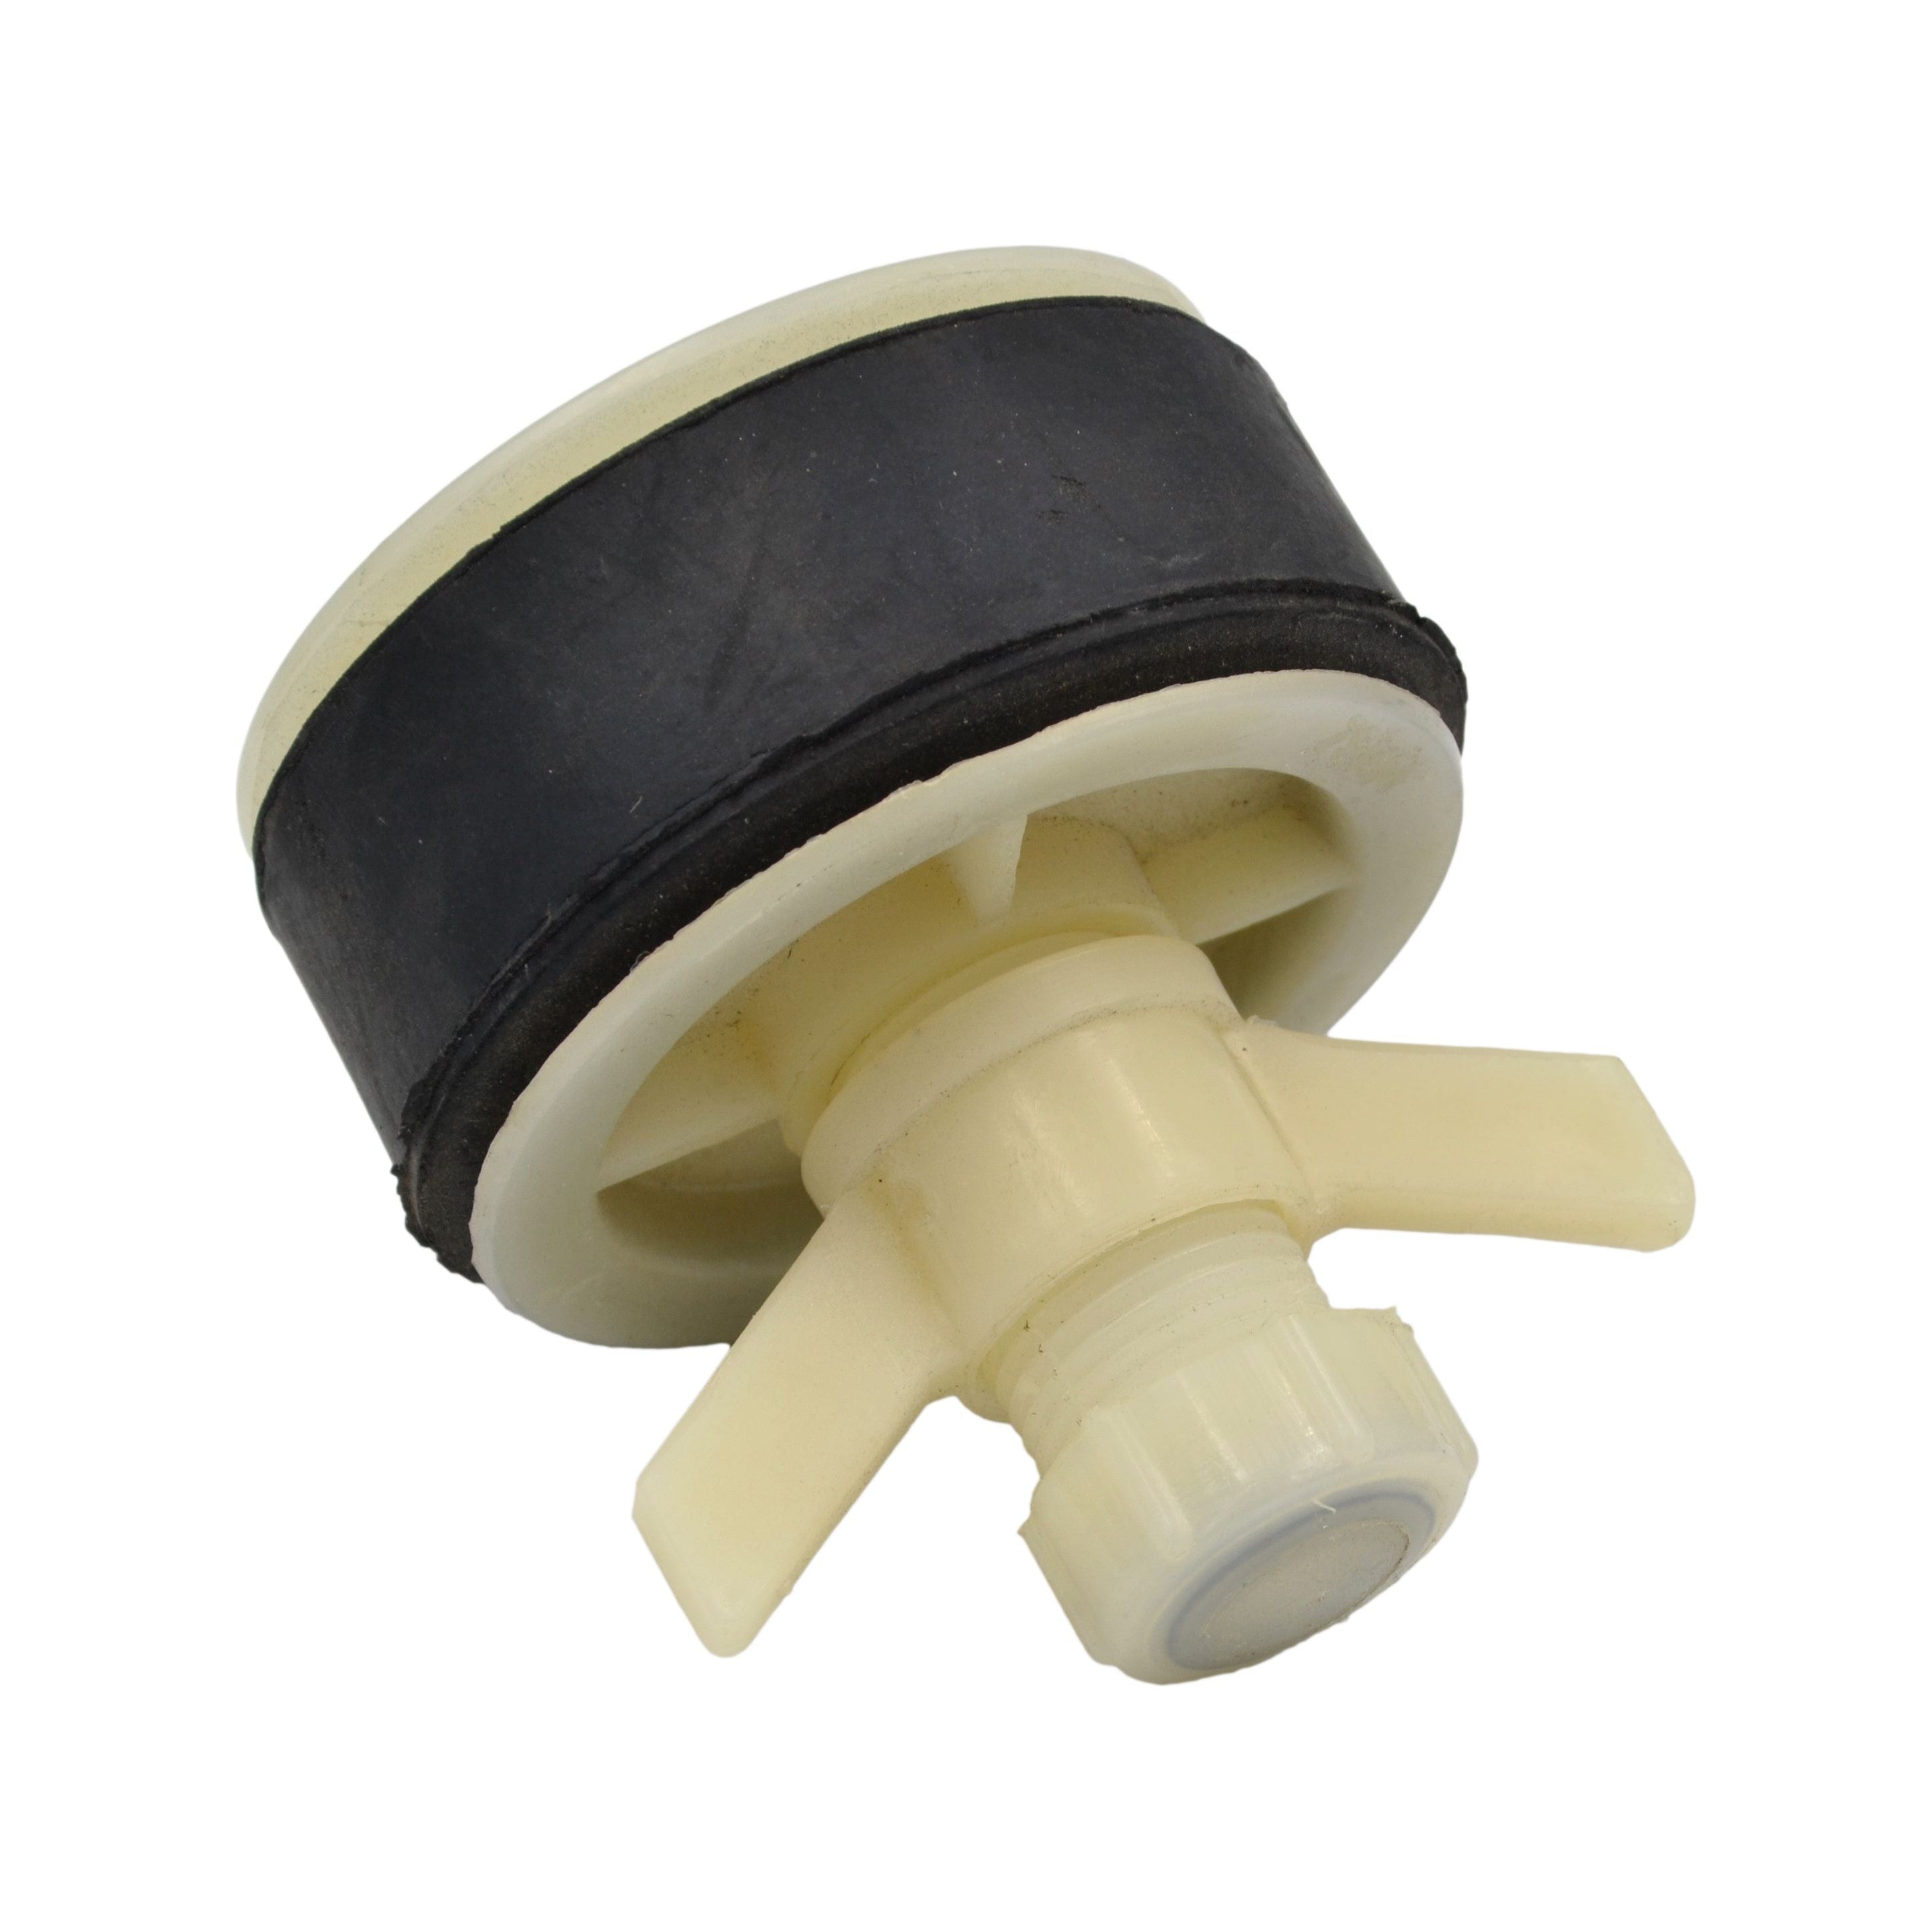 Nylon Mechanical Pipe Test plug bung with 13mm bypass 73mm to 88mm